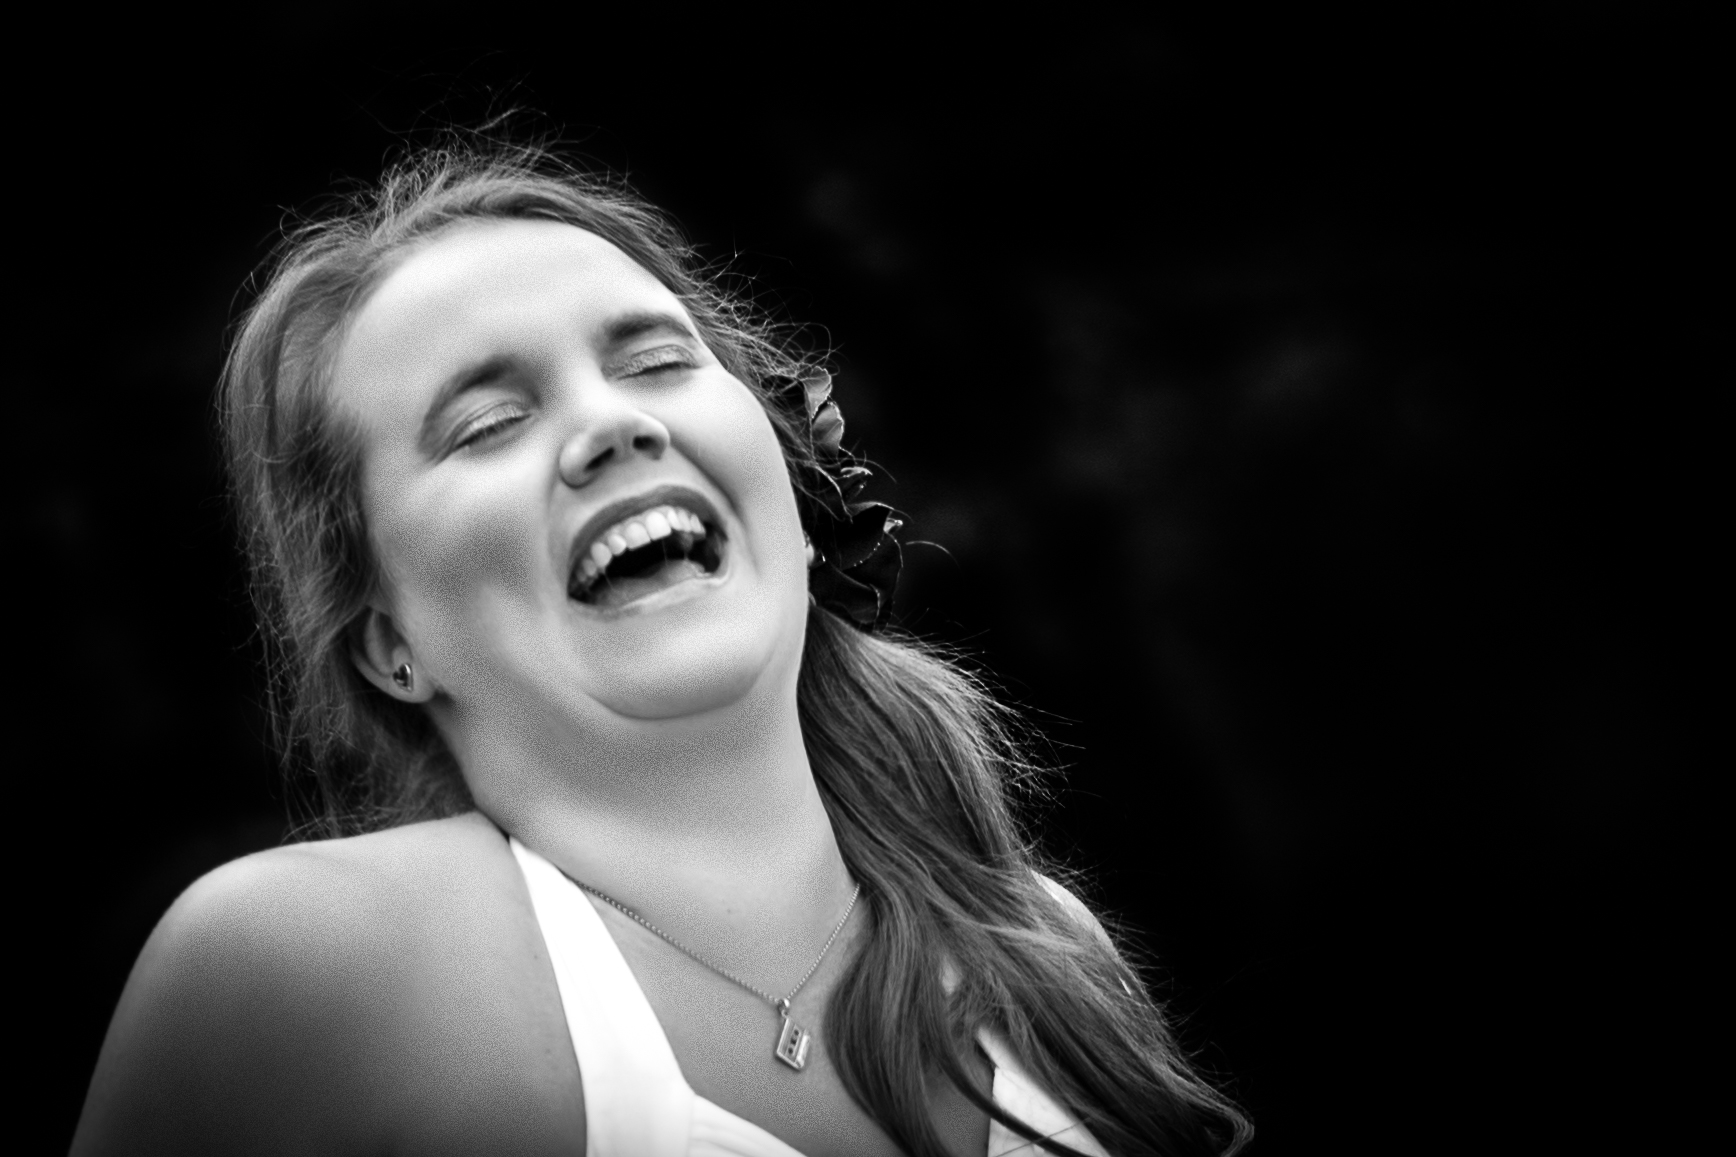 Black and white photo of a lady laughing with her eyes closed. She has a flower in her long hair over one shoulder, and is wearing a white halterneck dress. Her name is Dielle, pronounced Dee Ell.